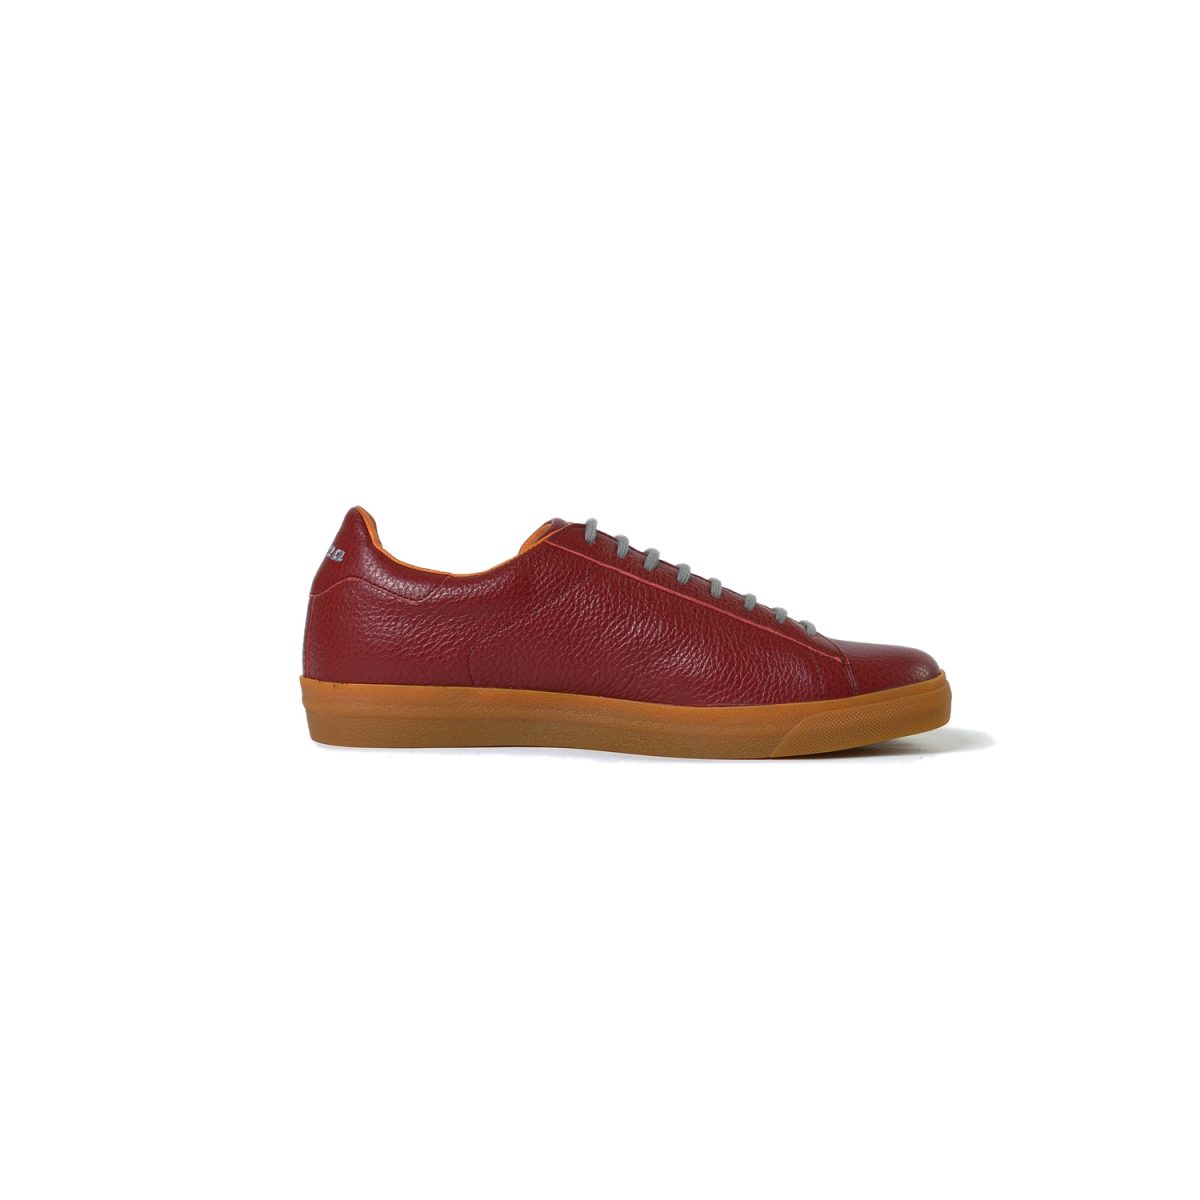 Tisza shoes - Simple - Burgundy